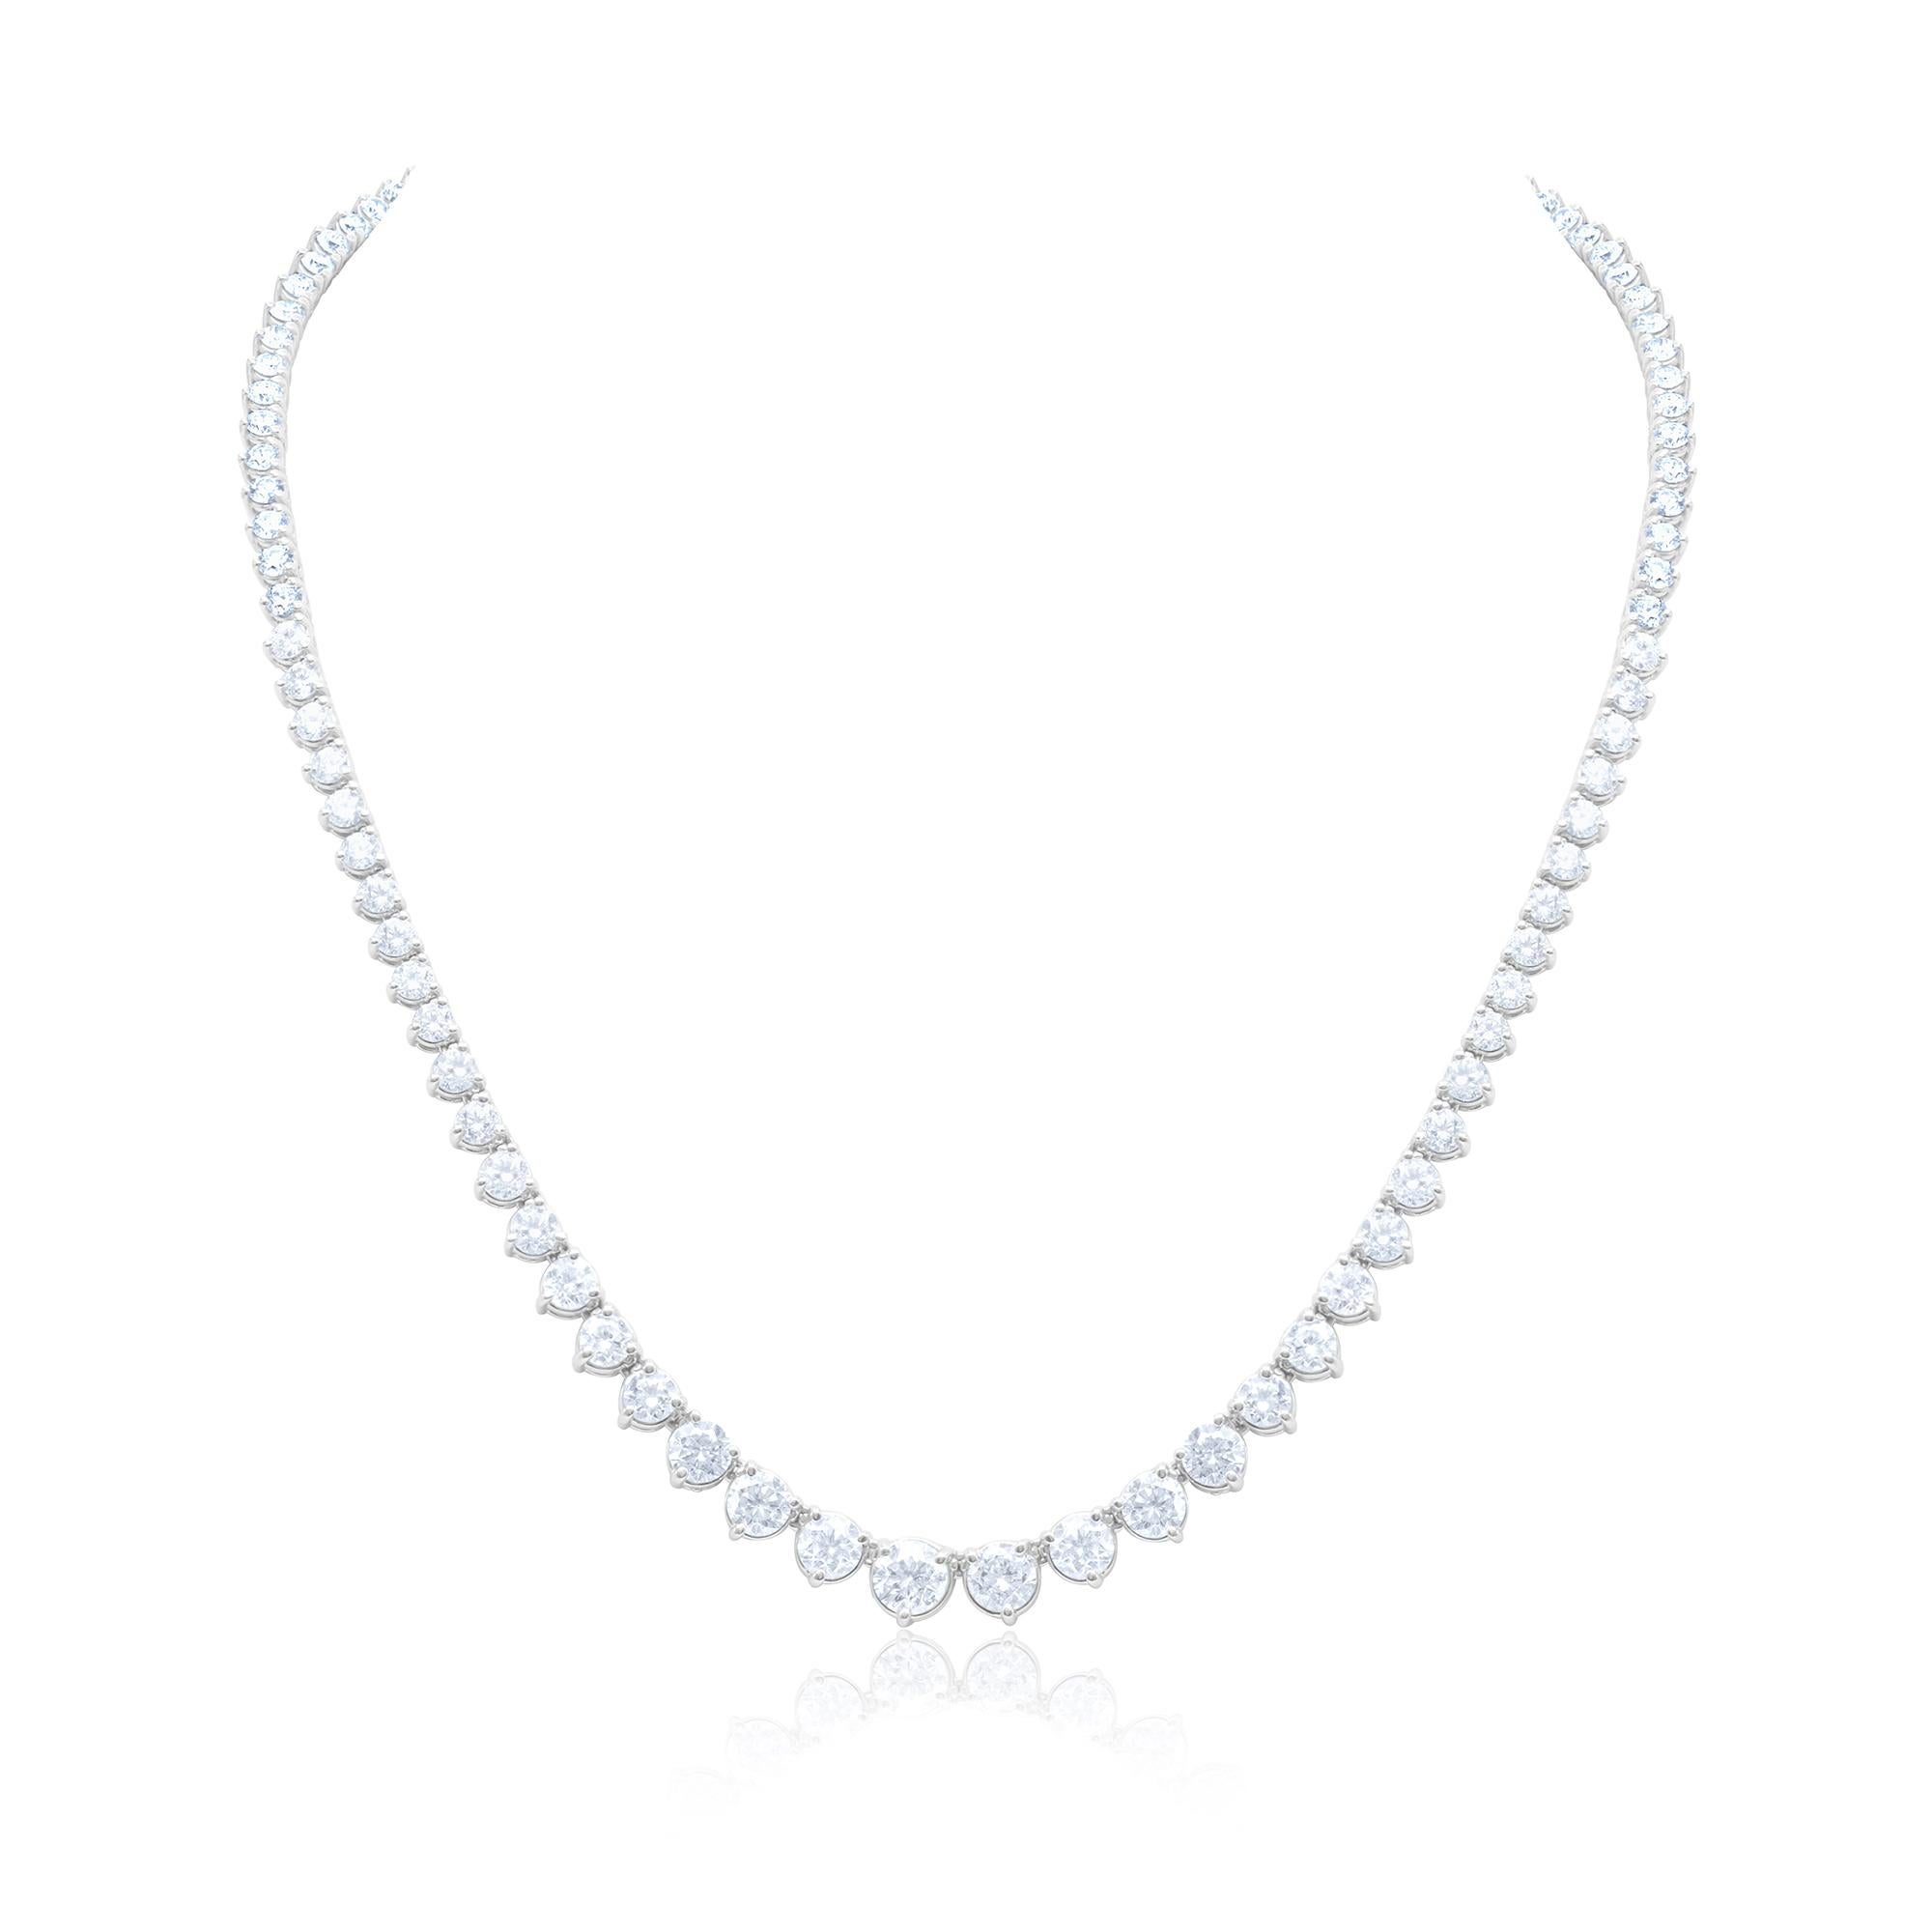 Custom 18k white gold graduated tennis necklace 17.80 cts round diamonds set in 3 prongs. Color FG SI clarity. Excellent cut.
